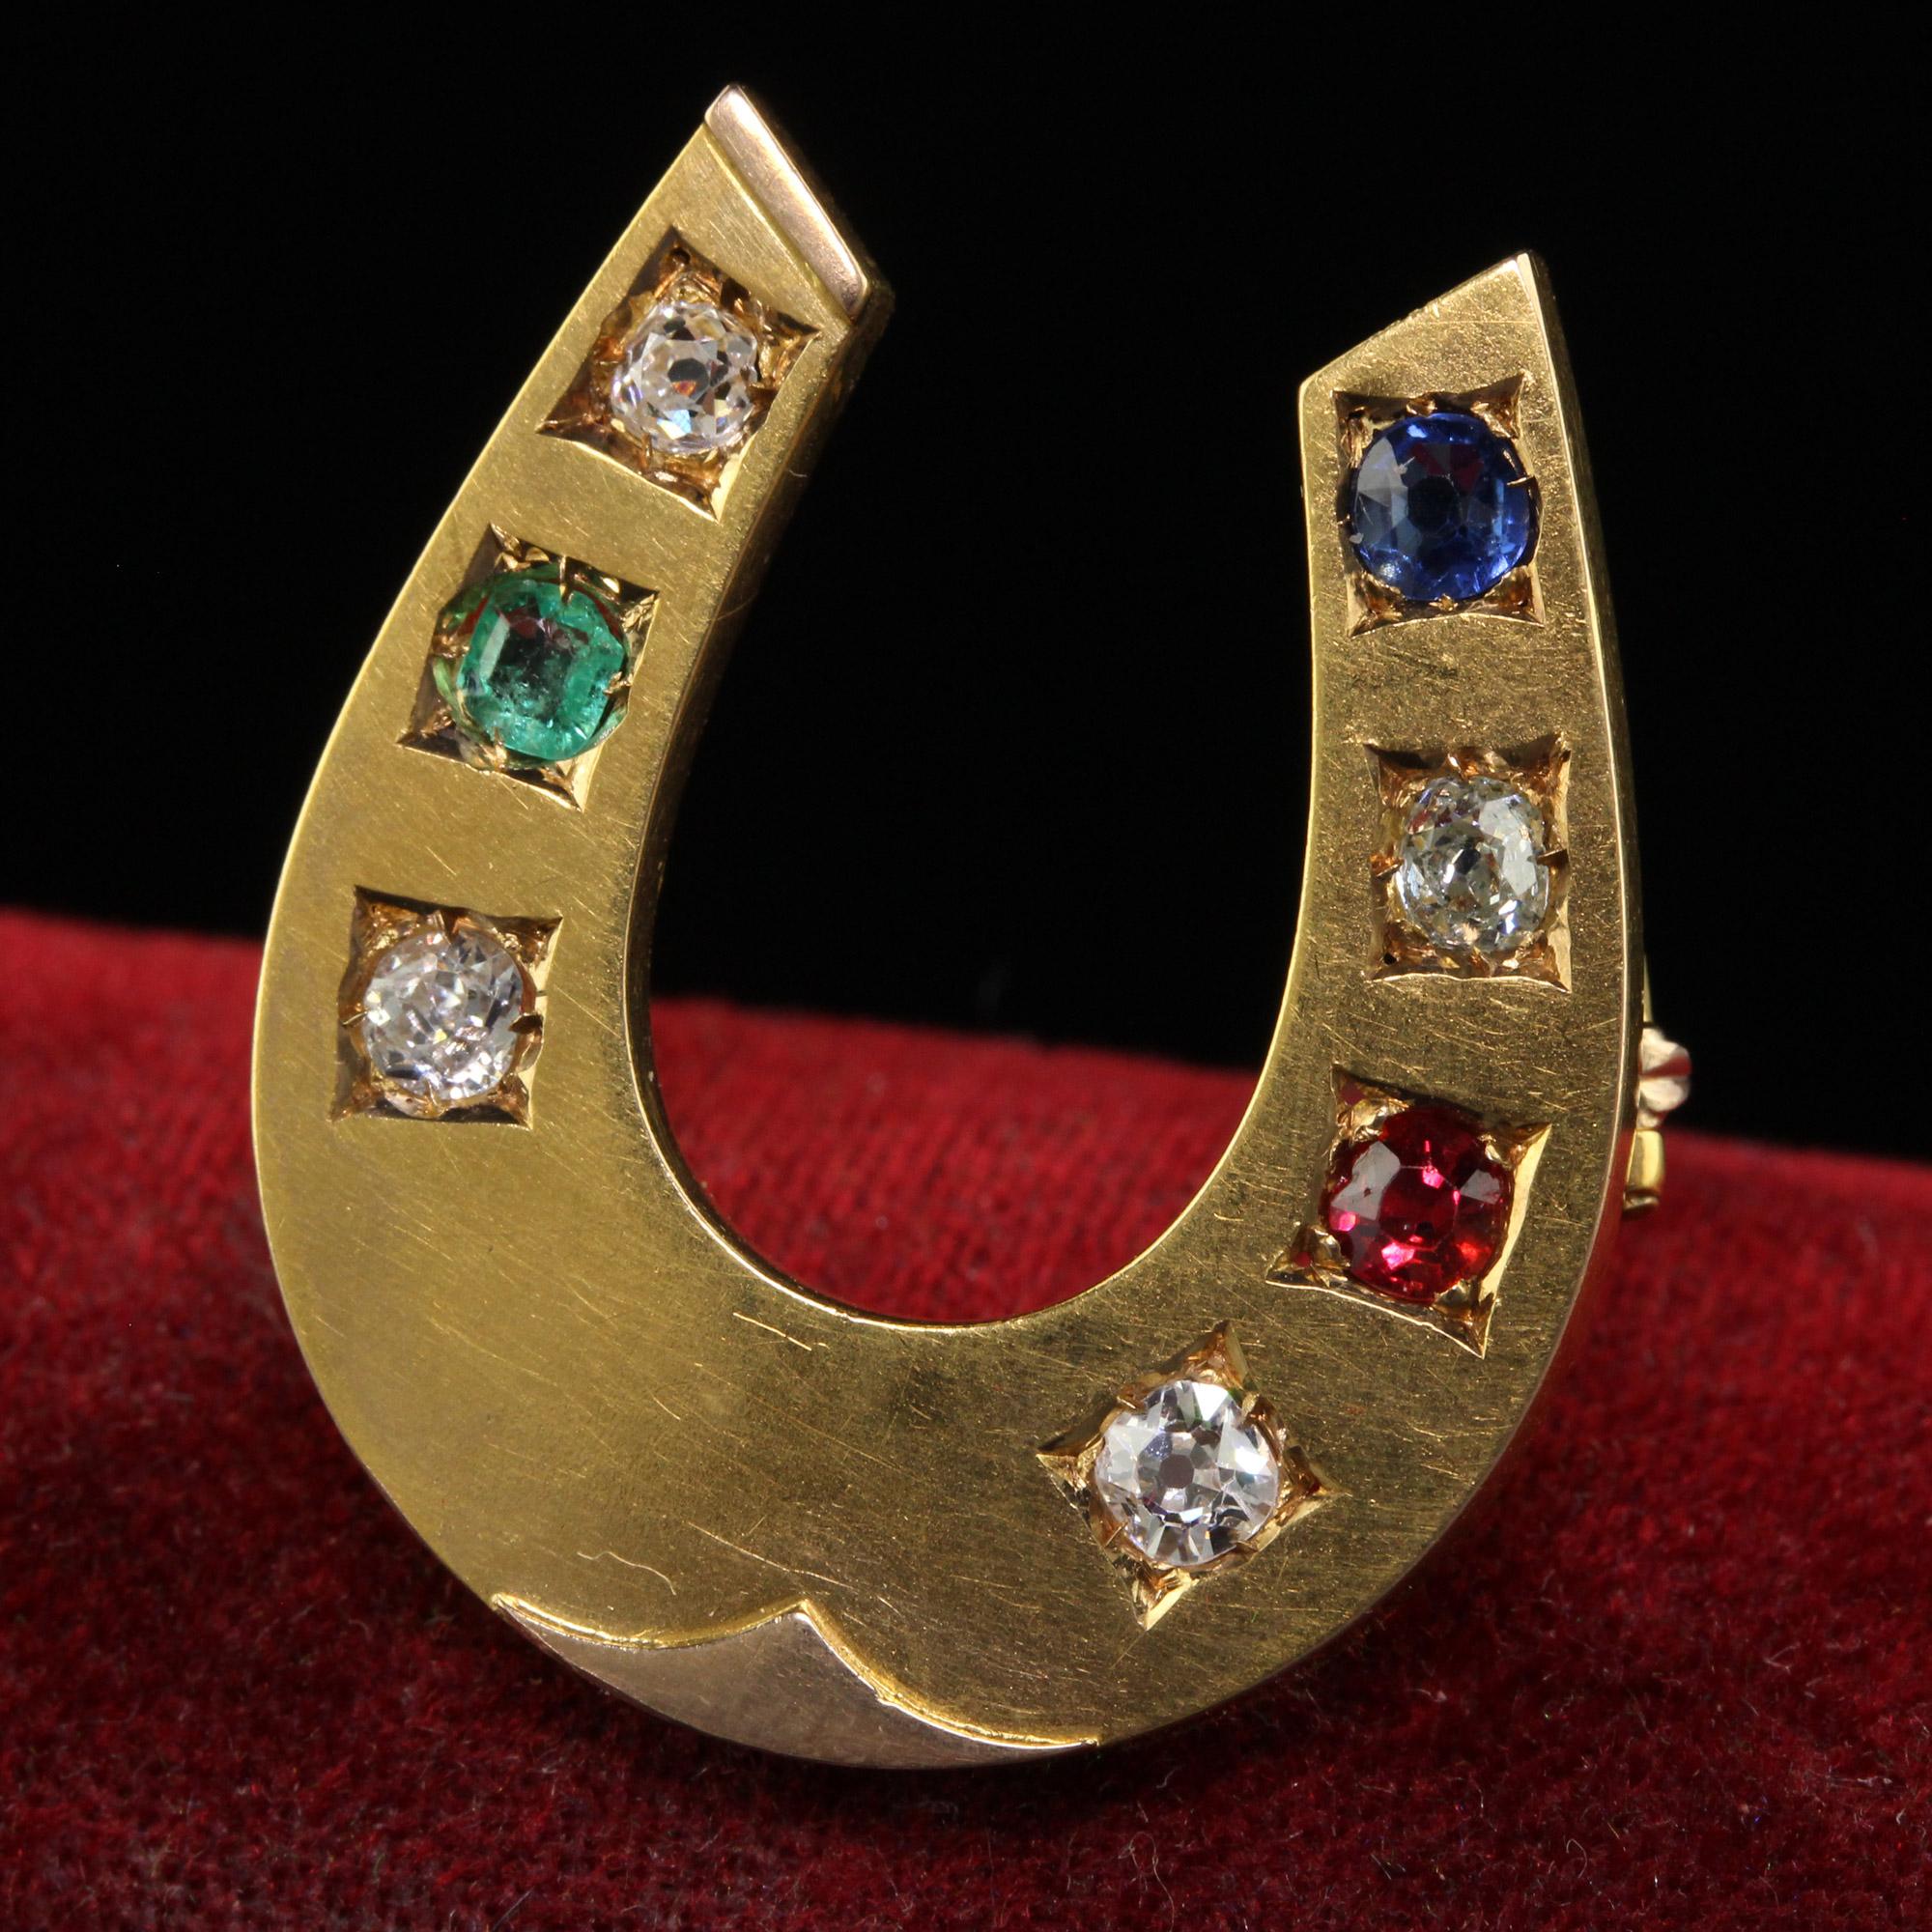 Beautiful Antique Victorian 18K Gold Old Mine Diamond Ruby Sapphire Emerald Horseshoe Pin. This gorgeous Victorian horseshoe pin is crafted in 18k yellow gold. The top of the pin holds four old mine cut diamonds with a single natural sapphire, ruby,